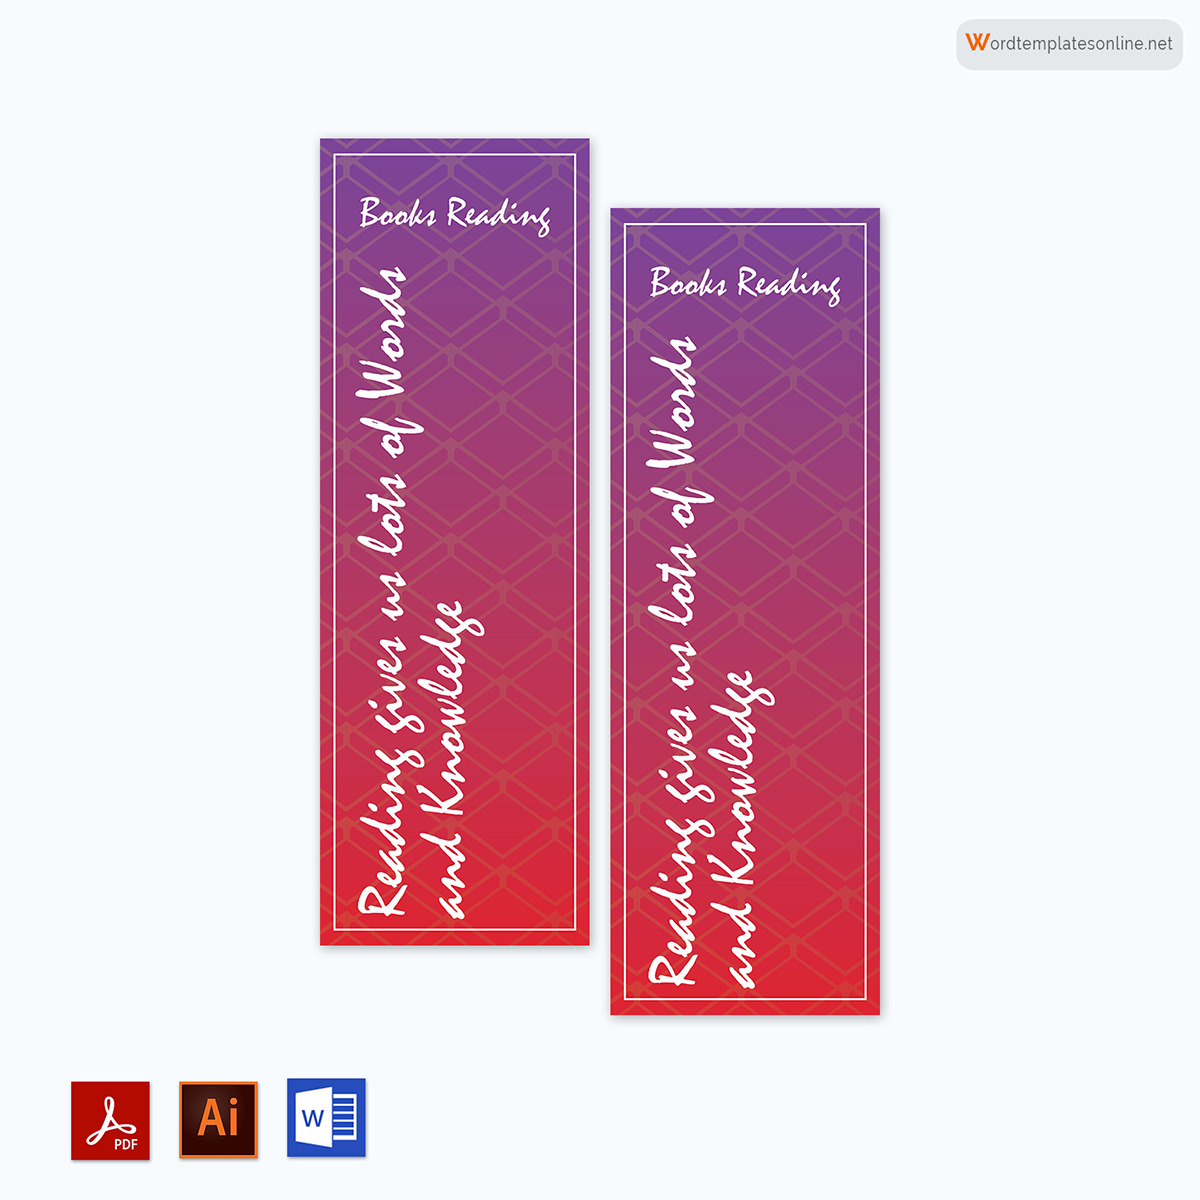 Bookmark template powerpoint